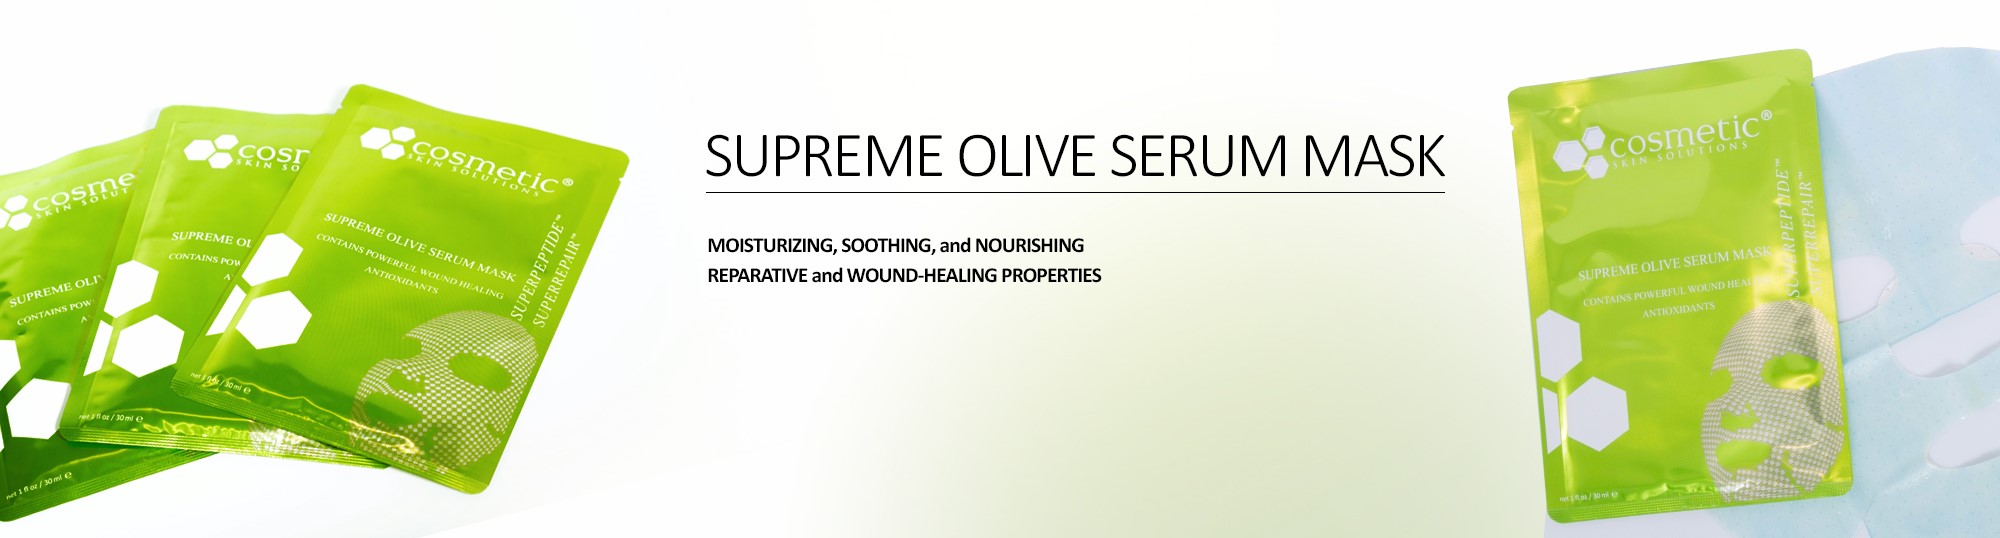 Supreme Olive Serum Mask (5 Pack) - Cosmetic Skin Solutions